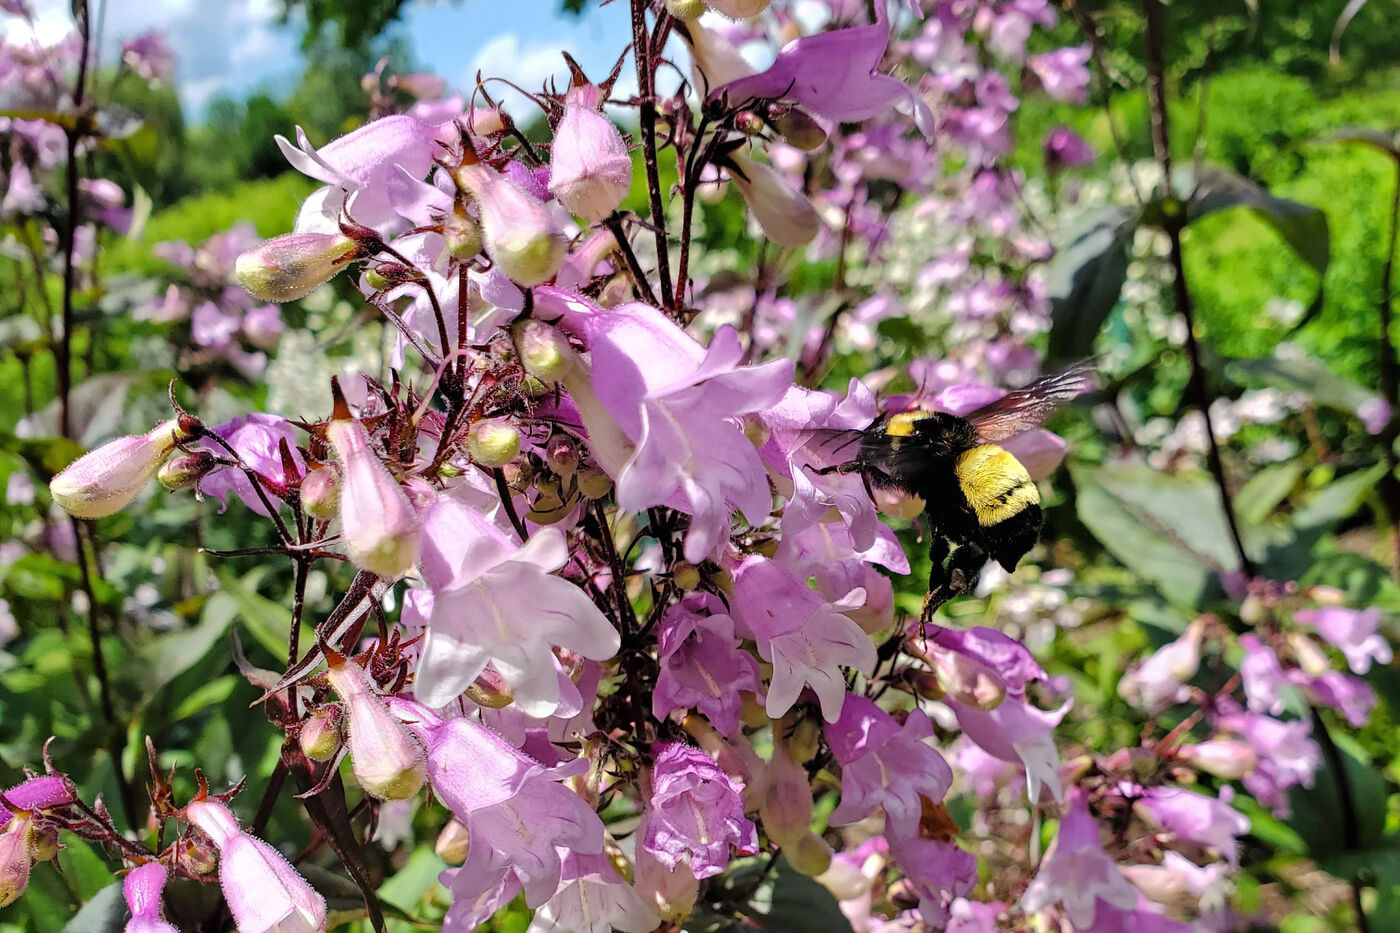 A large yellow and black bee is foraging on pale pink flowers.